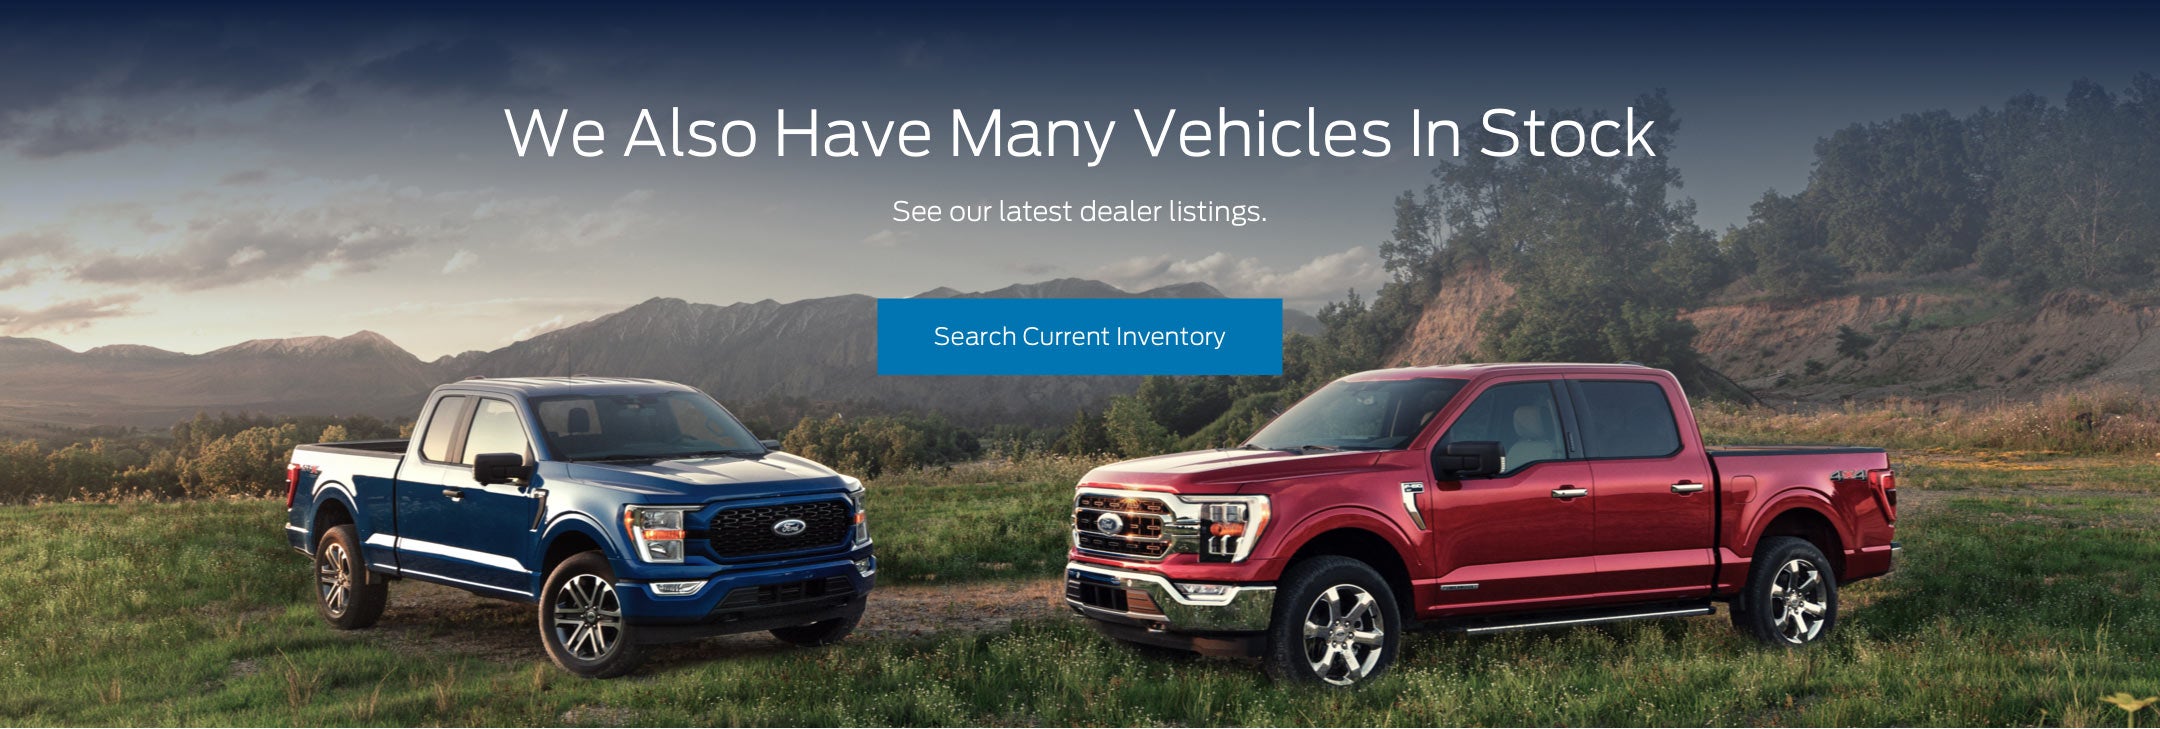 Ford vehicles in stock | Miller Ford in Lumberton NJ